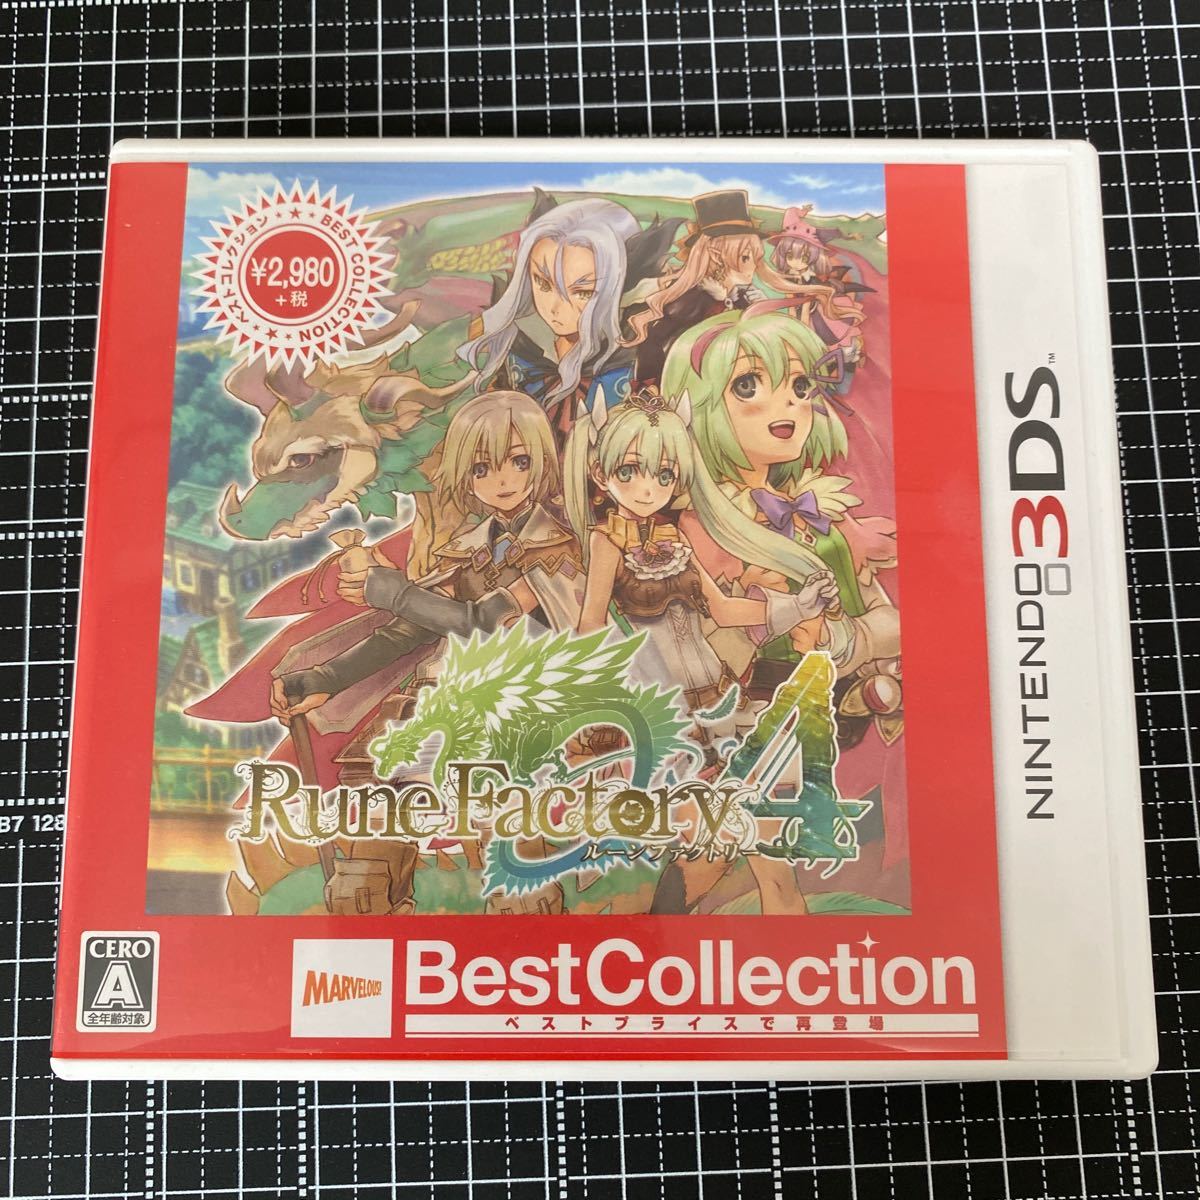 【3DS】 ルーンファクトリー4 [Best Collection]